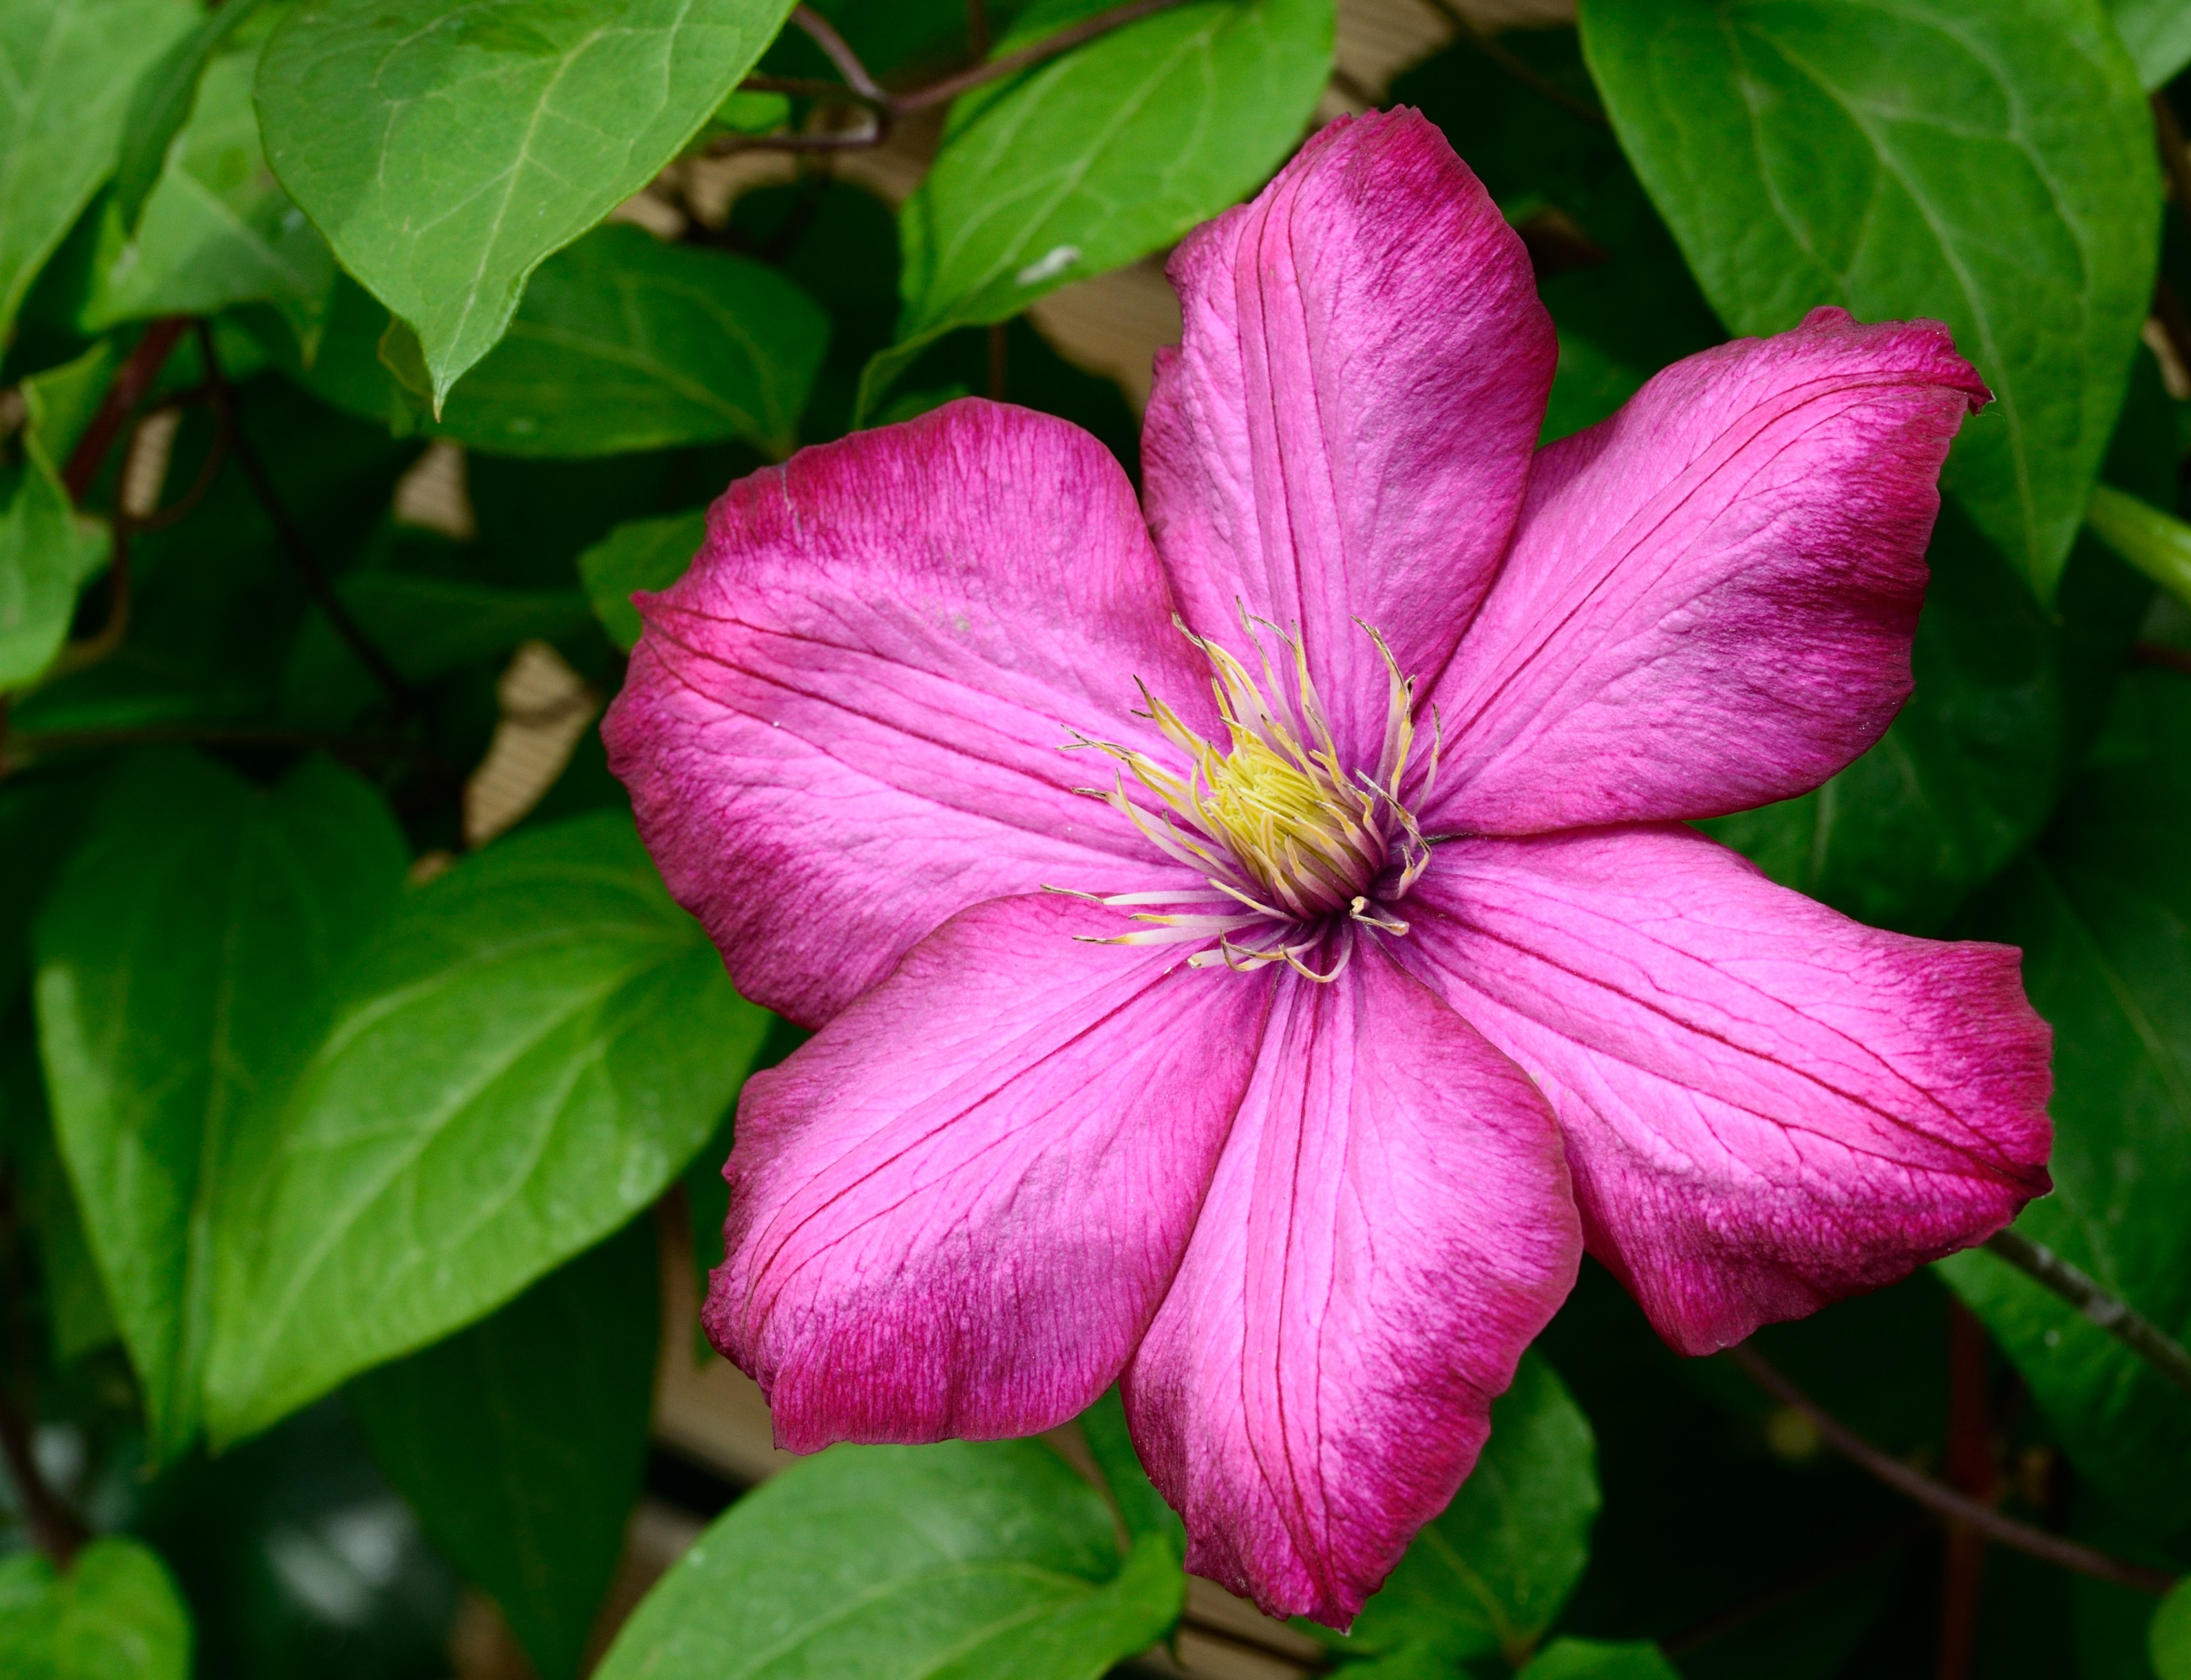 earth, clematis, flower, nature, pink flower, flowers